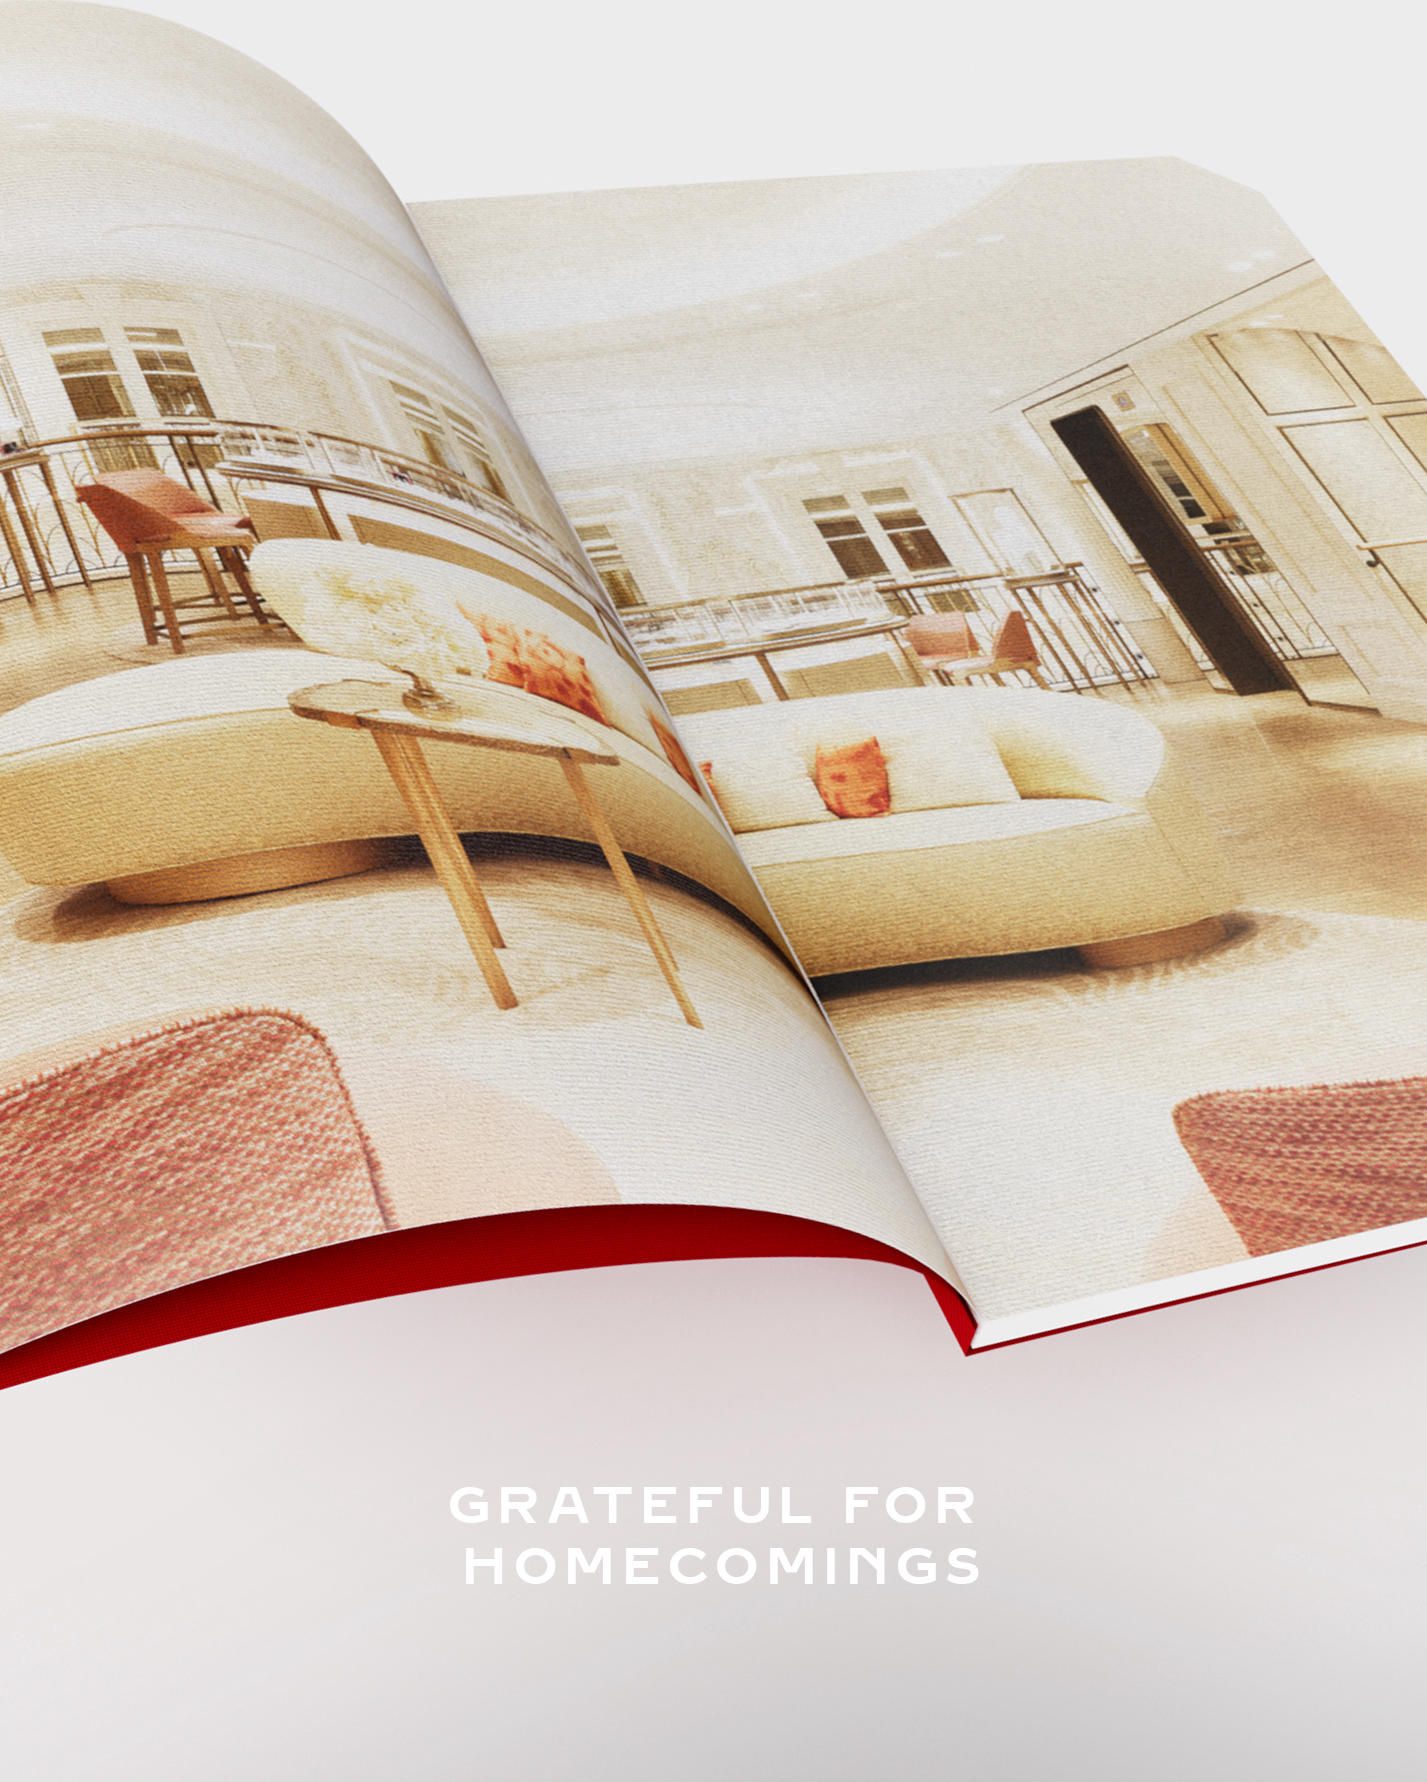 image  1 Cartier Official - The Maison begins the year in gratitude – by looking back on the brighter moments